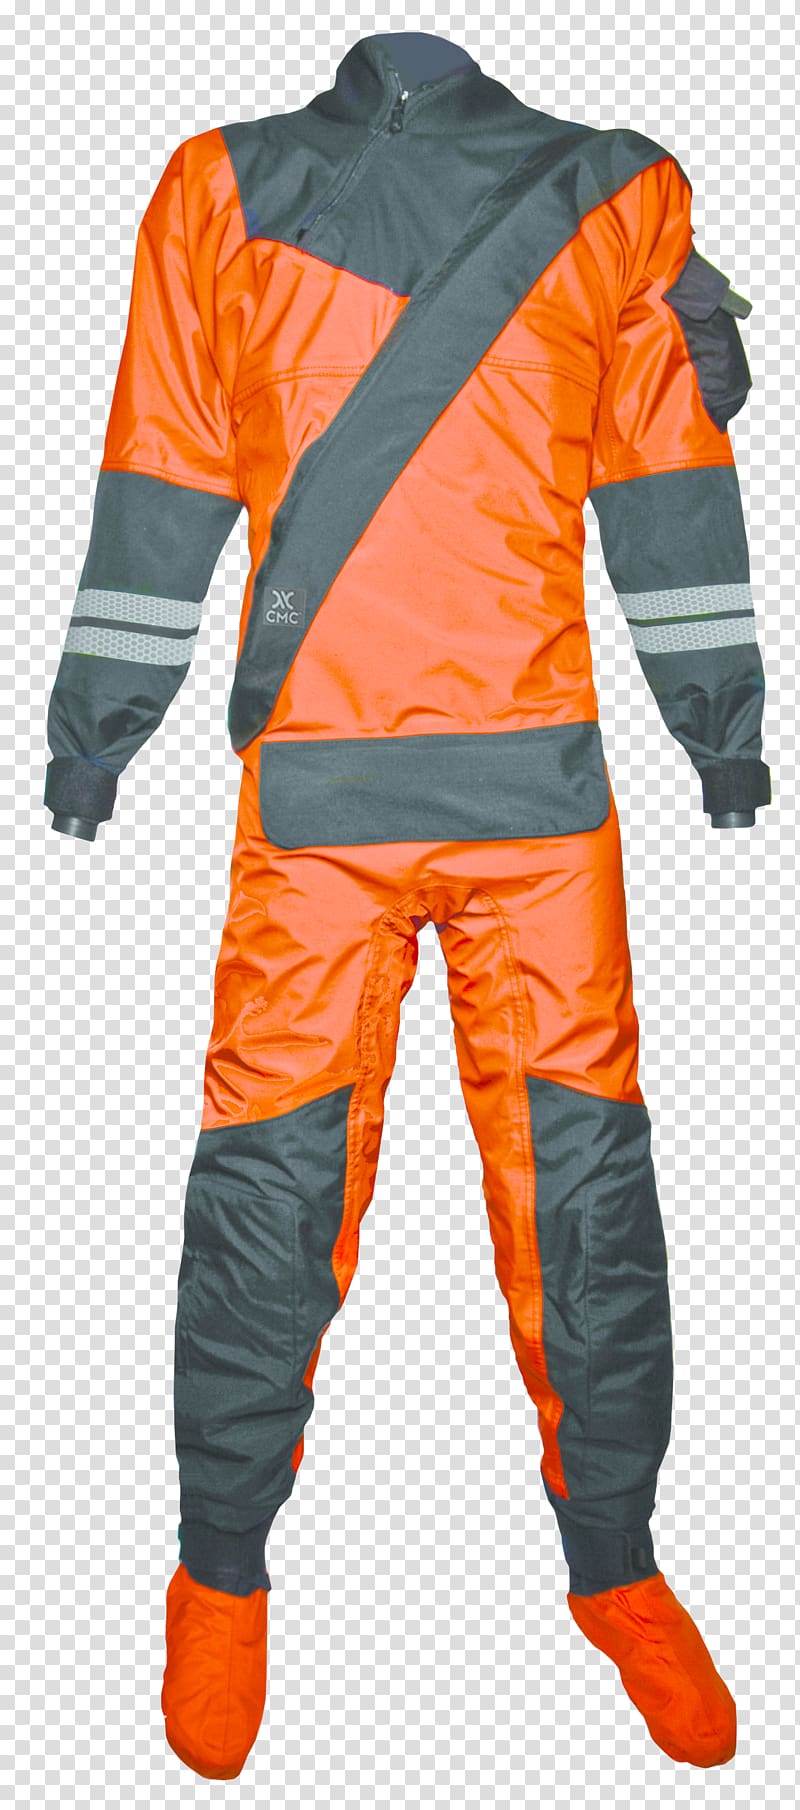 Dry suit Clothing Search and rescue Swift water rescue, suit transparent background PNG clipart